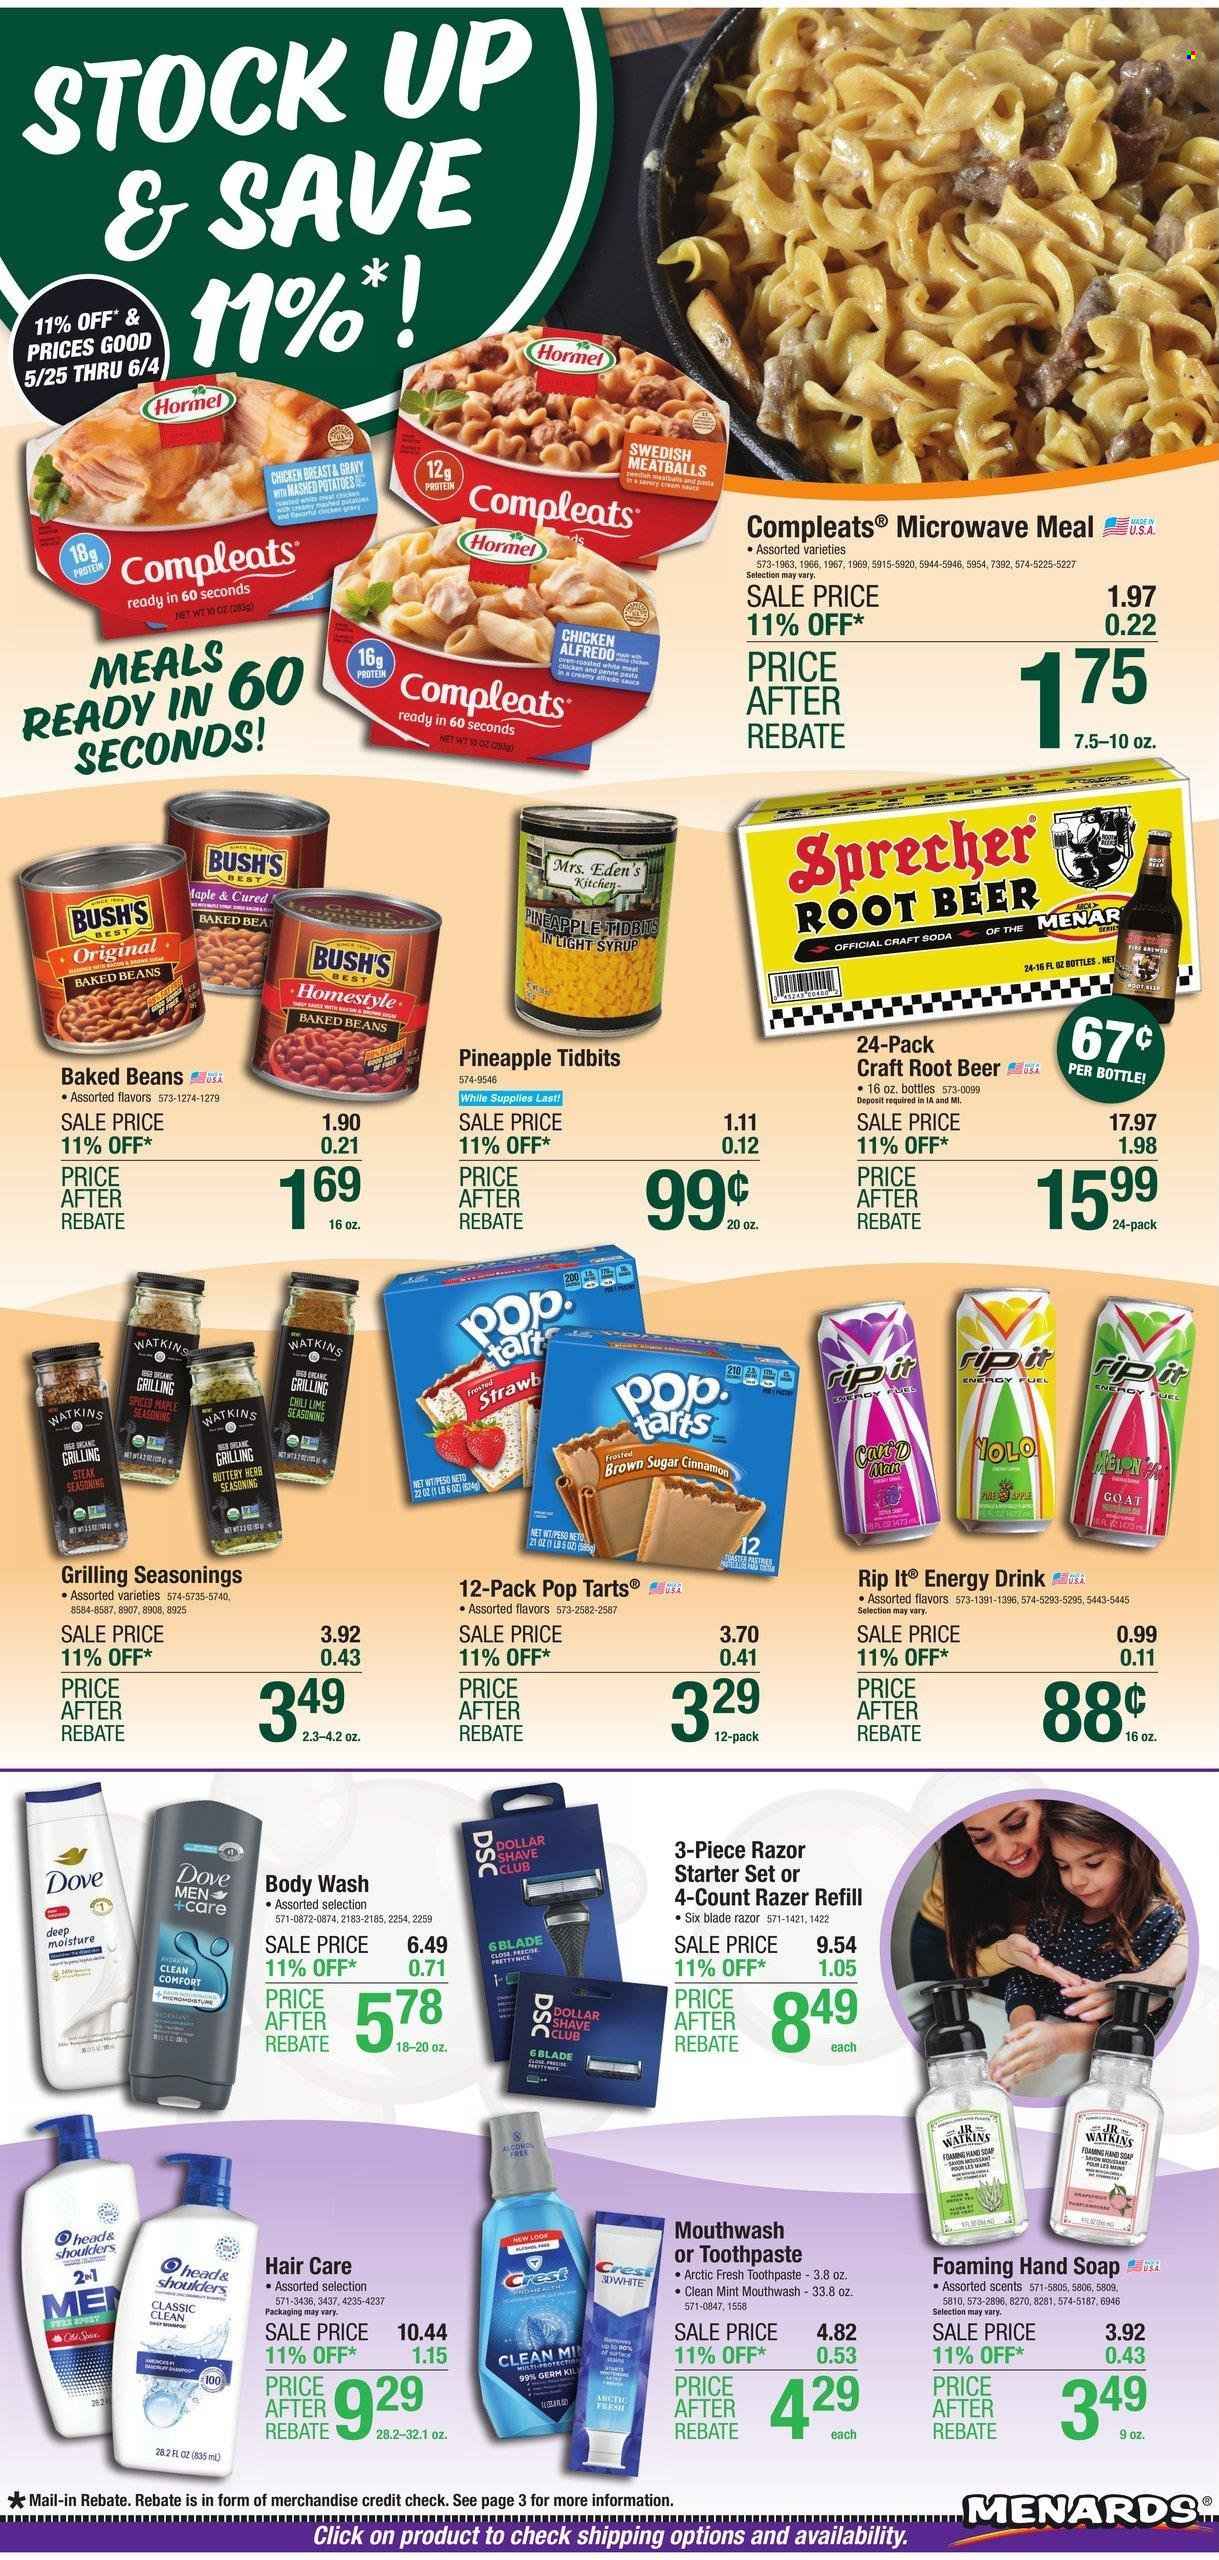 thumbnail - Menards Flyer - 05/24/2023 - 06/04/2023 - Sales products - tart, beans, pineapple, mashed potatoes, meatballs, sauce, Hormel, Dove, Pop-Tarts, cane sugar, Mrs. Eden's Kitchen, baked beans, spice, cinnamon, chicken gravy, syrup, energy drink, soda, alcohol, beer, chicken breasts, chicken, steak, body wash, hand soap, soap, toothpaste, mouthwash, Crest, Dollar Shave Club, Head & Shoulders, razor, fork, microwave, starter, melons. Page 1.